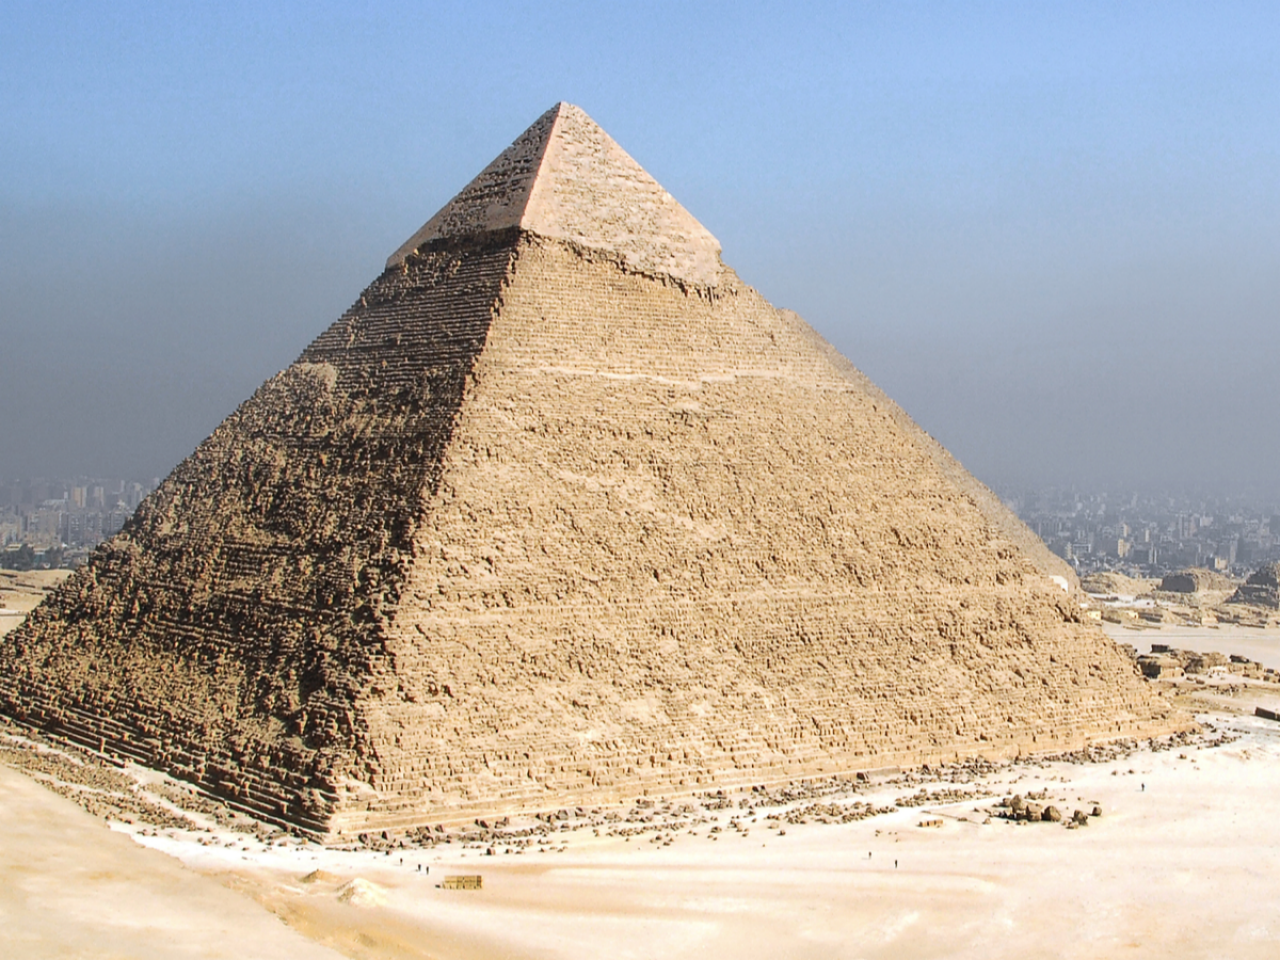 I saved an image of this pyramid a few months back but I can't